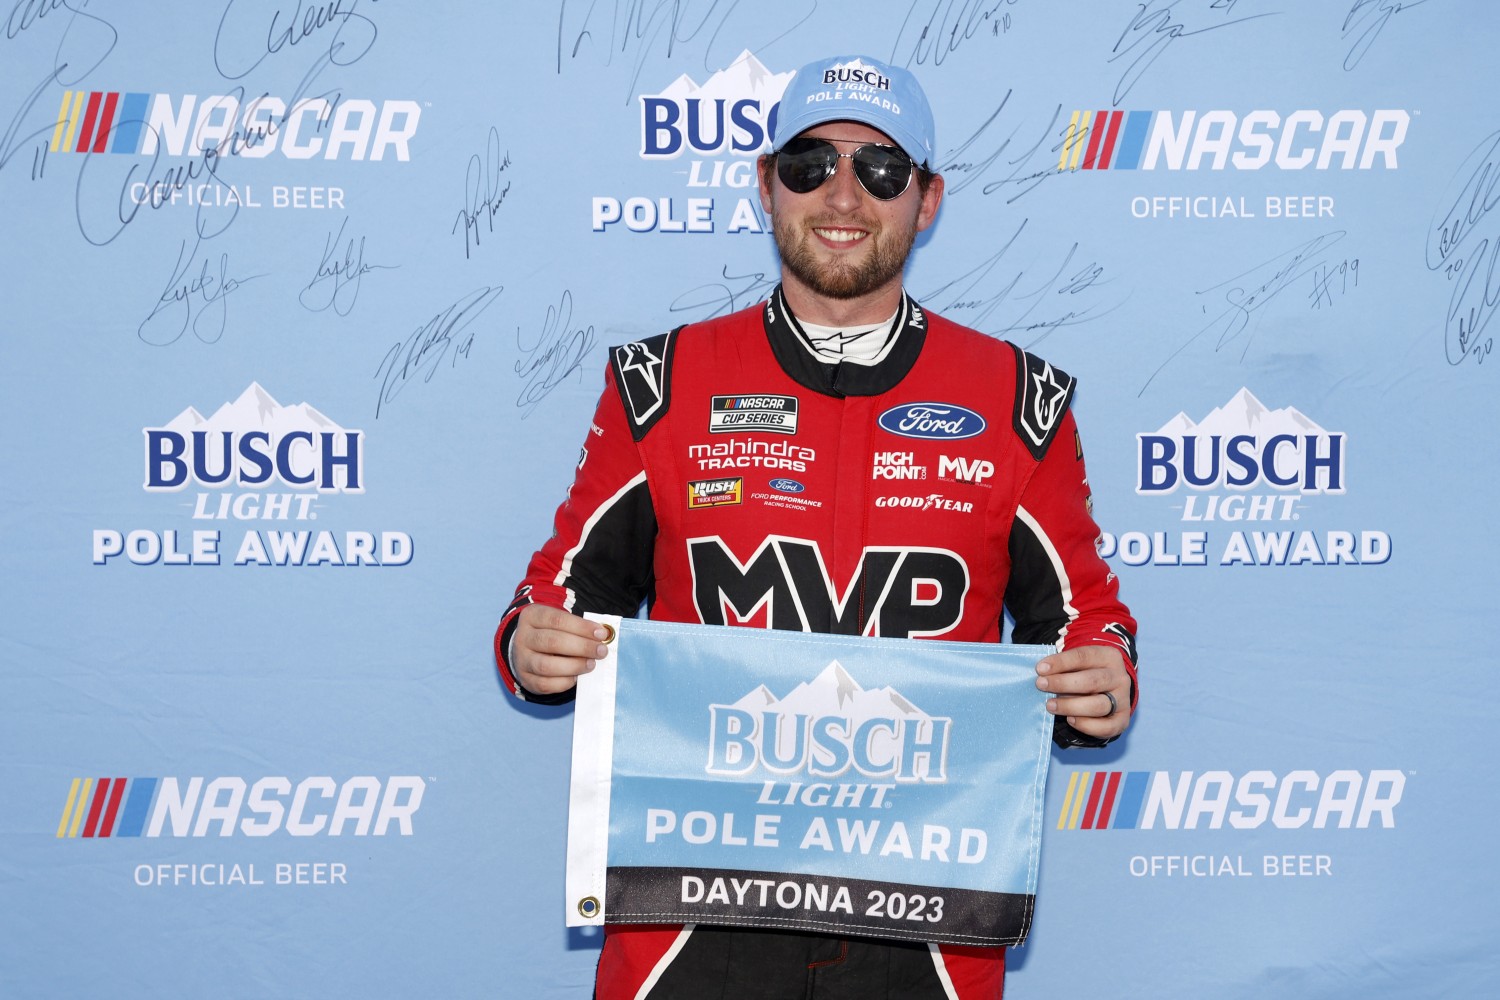 Chase Briscoe, driver of the #14 Magical Vacation Planner Ford, poses for photos after winning the pole award during qualifying for the NASCAR Cup Series Coke Zero Sugar 400 at Daytona International Speedway on August 25, 2023 in Daytona Beach, Florida. (Photo by Chris Graythen/Getty Images)